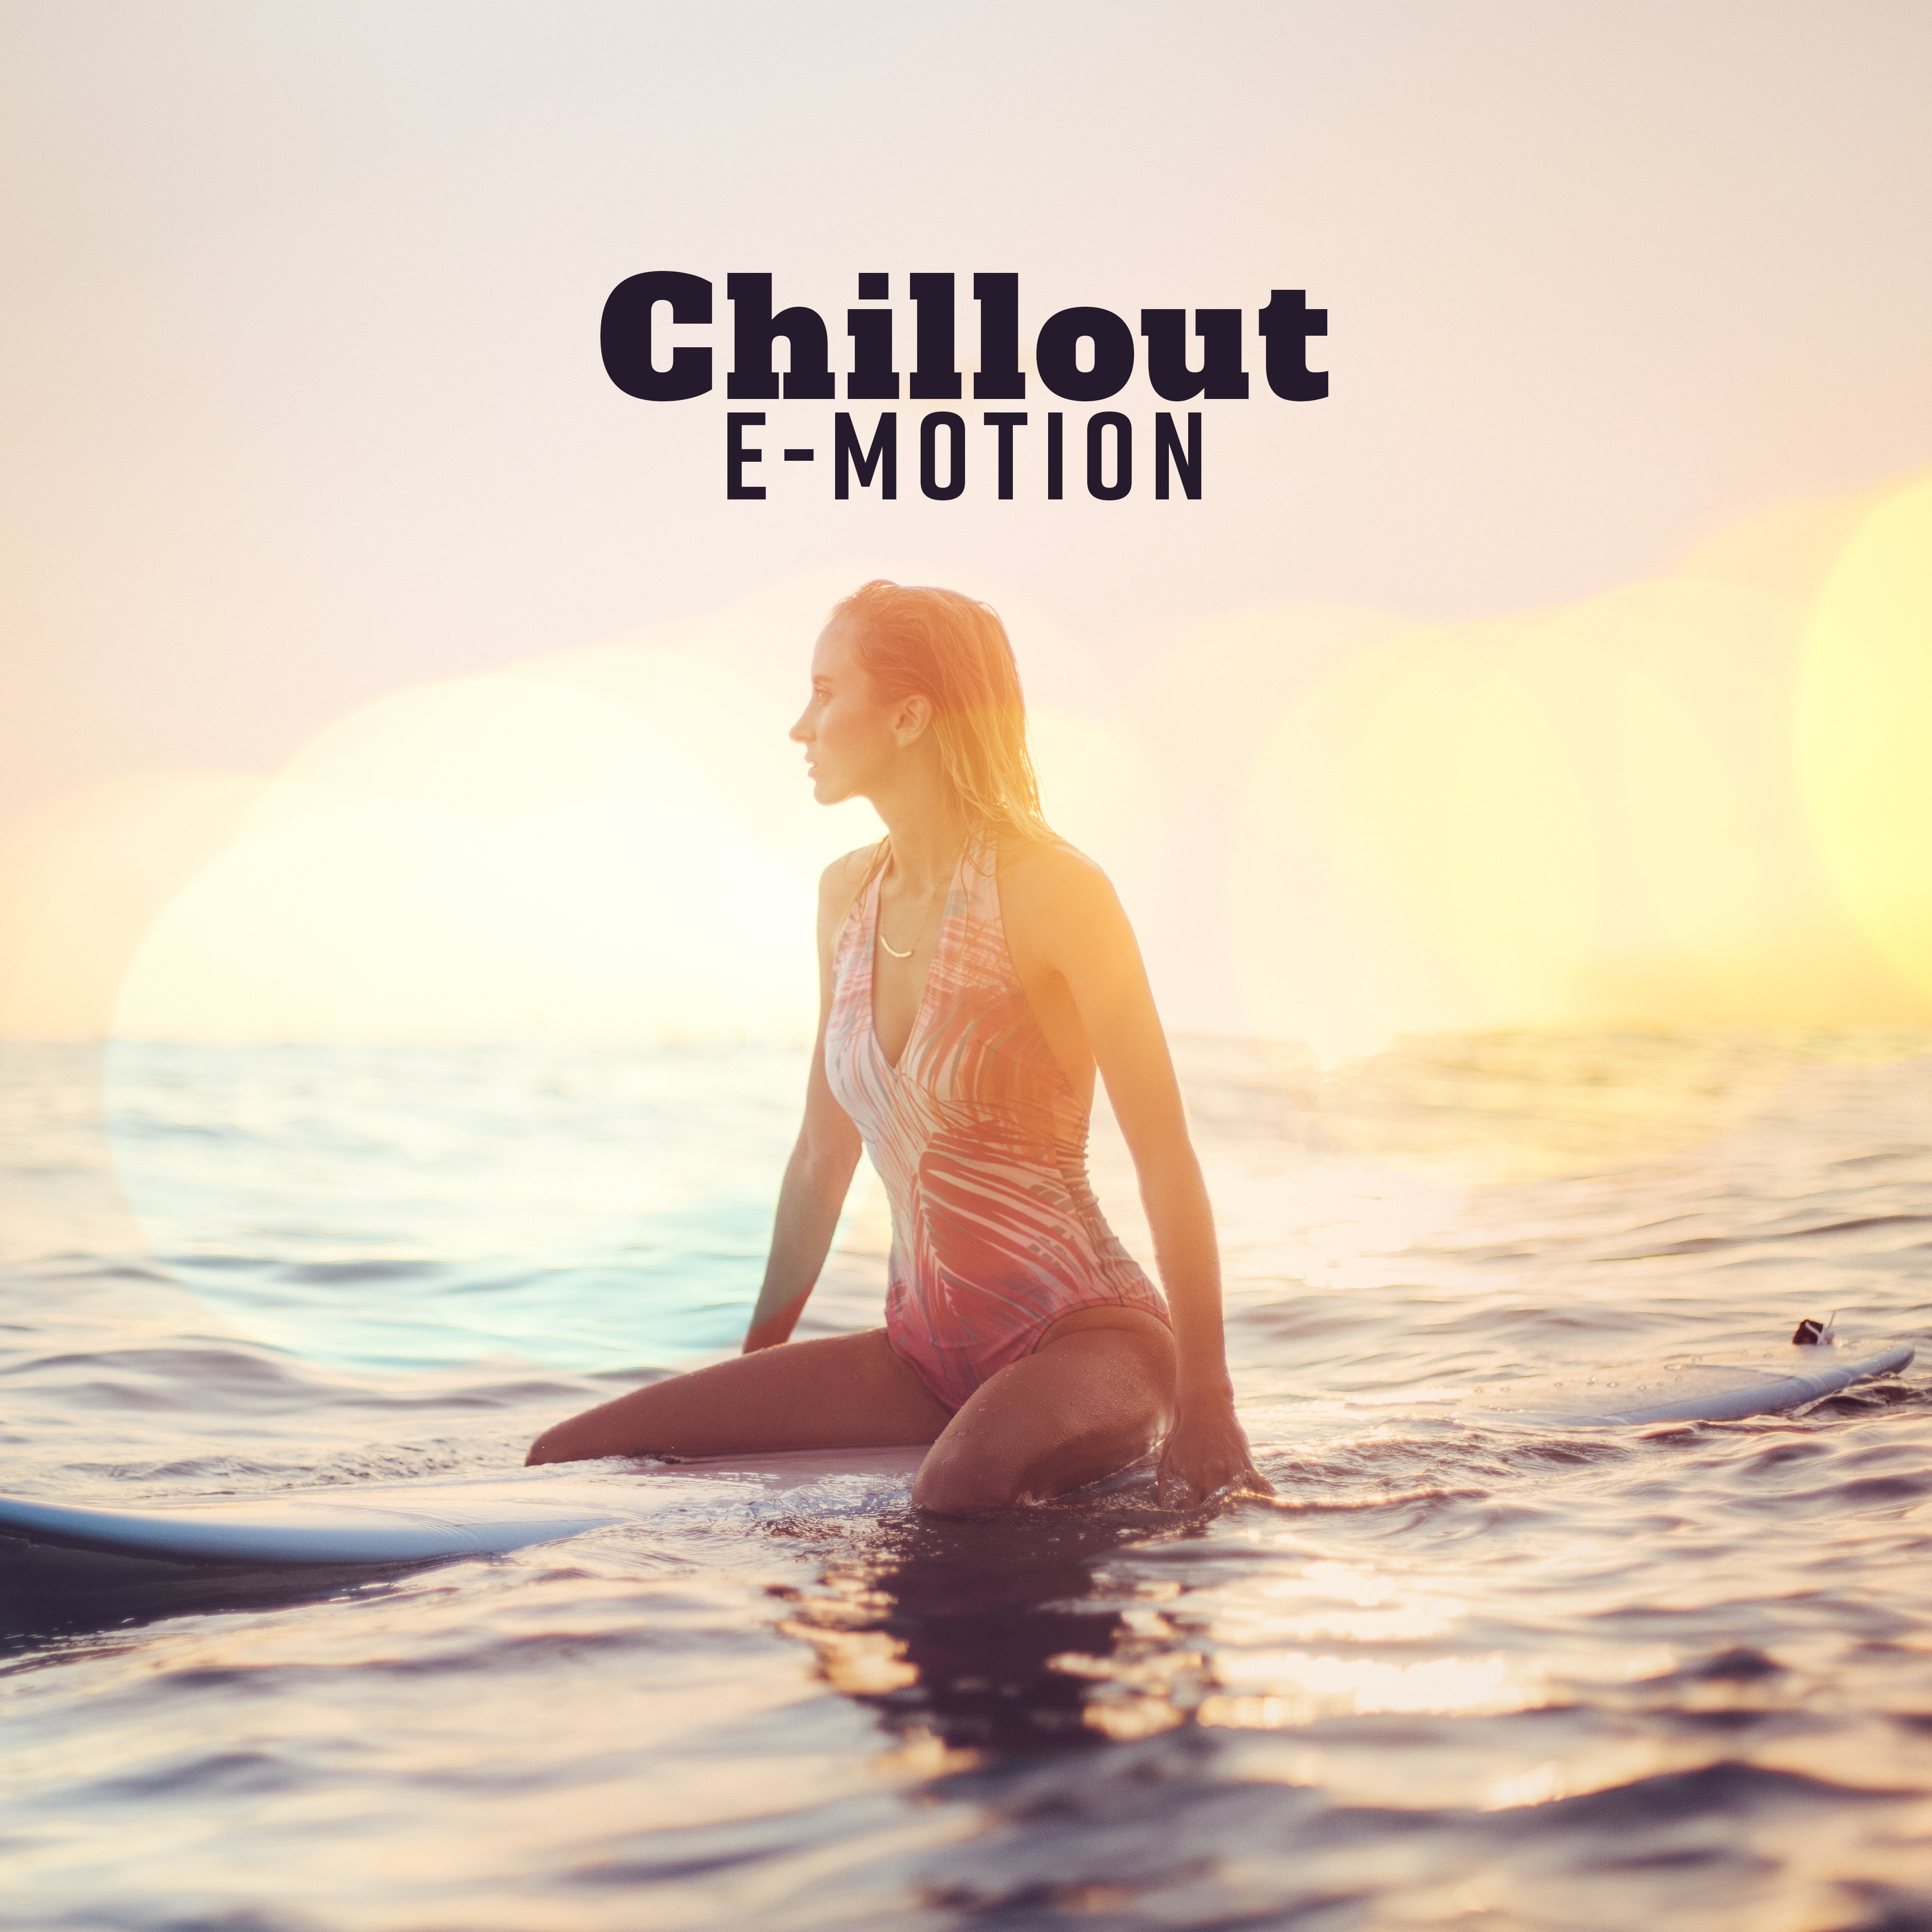 Chill Out E-Motion – Chillout 2018